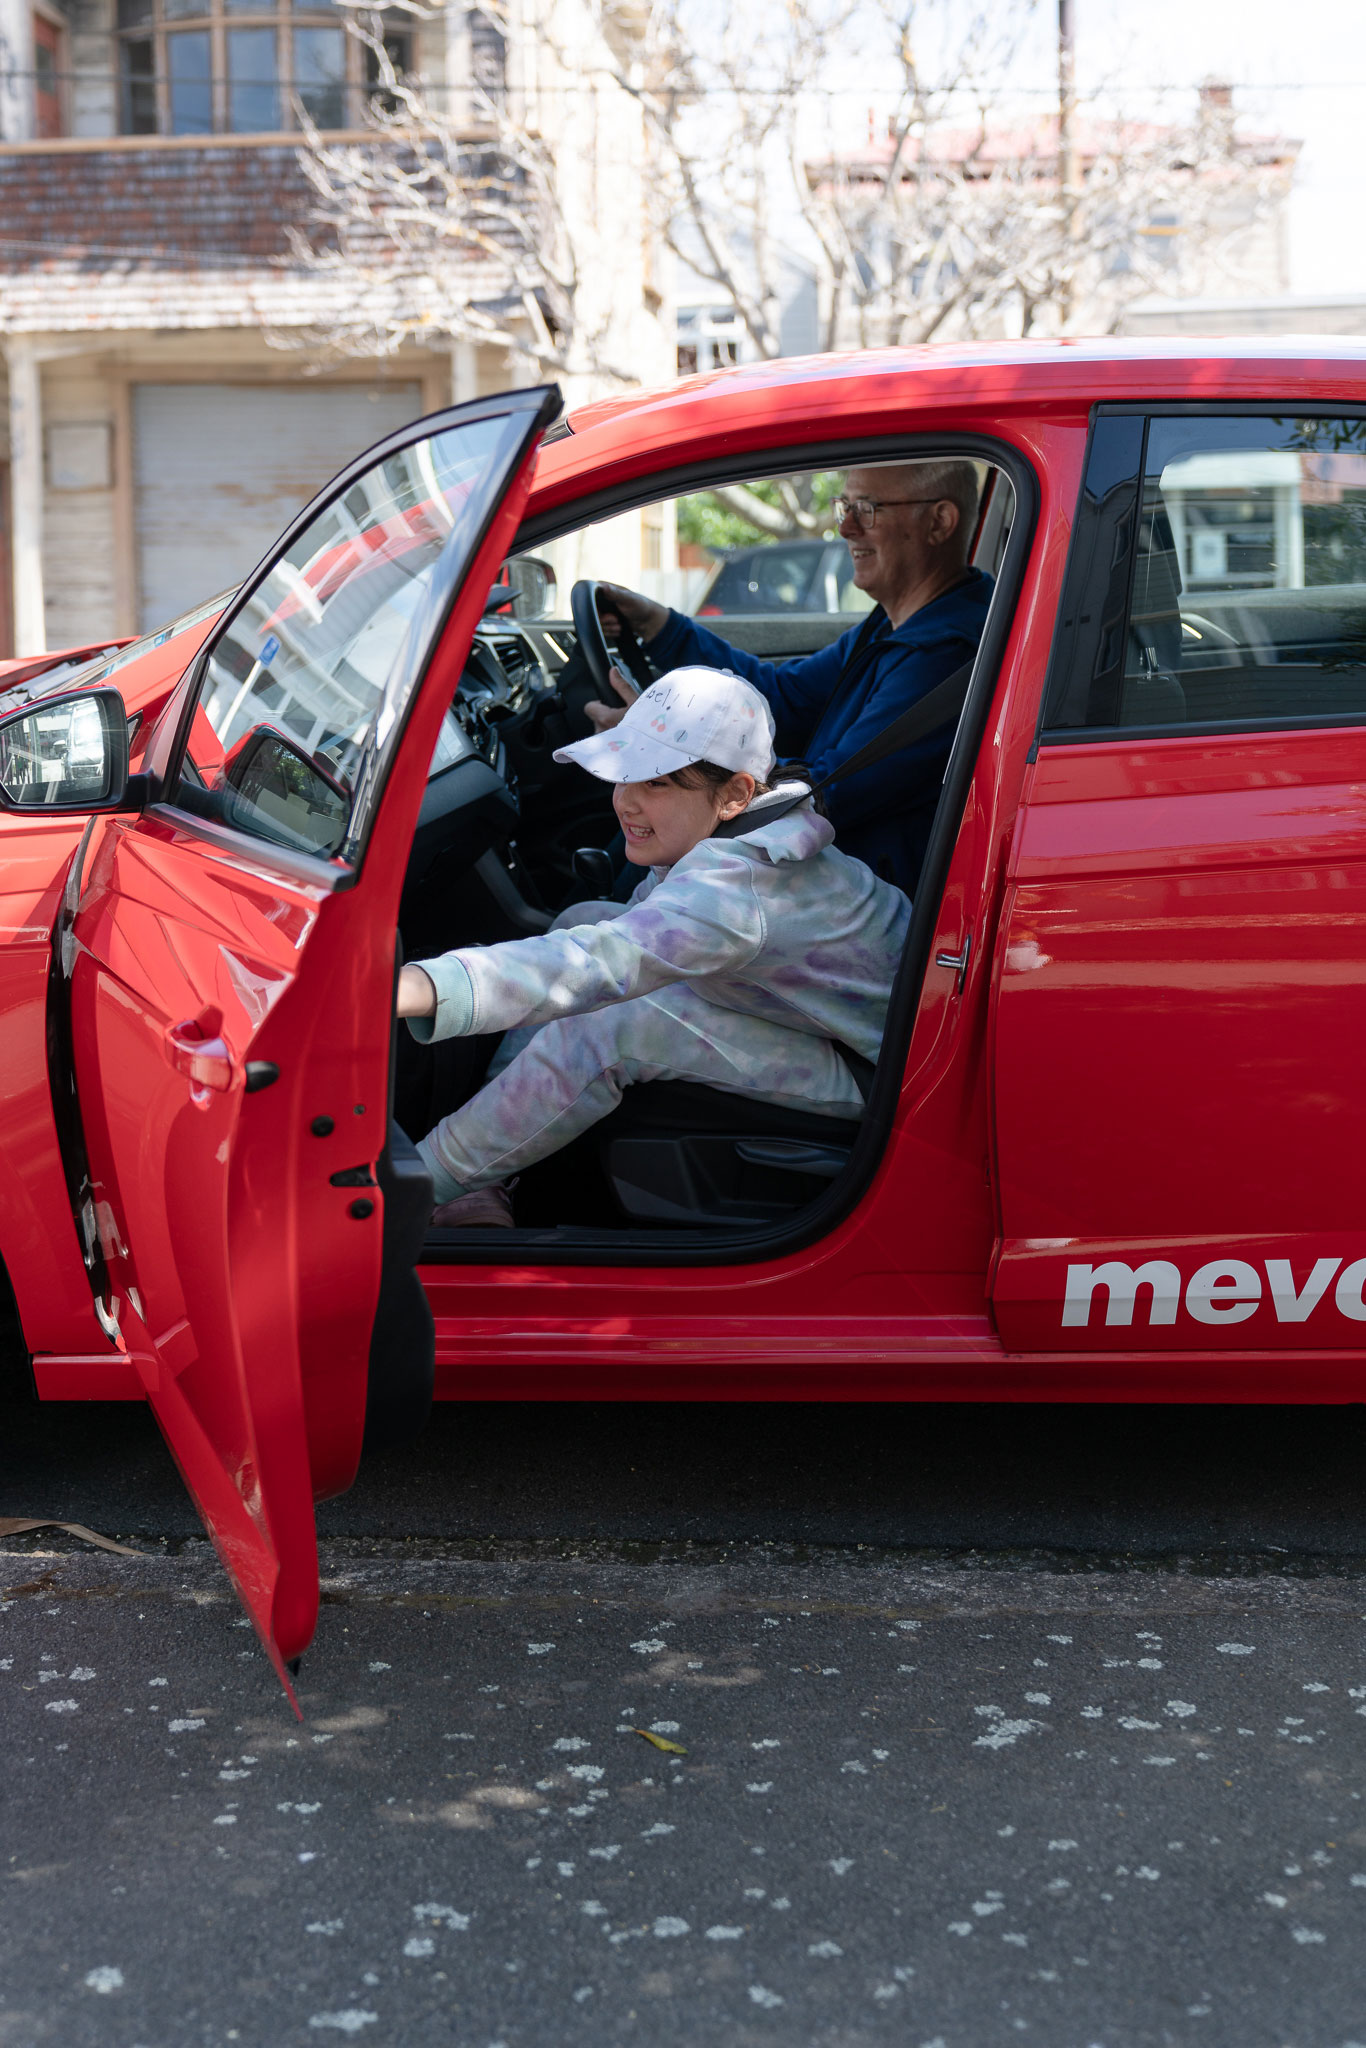 Donald and his daughter getting into a Mevo.